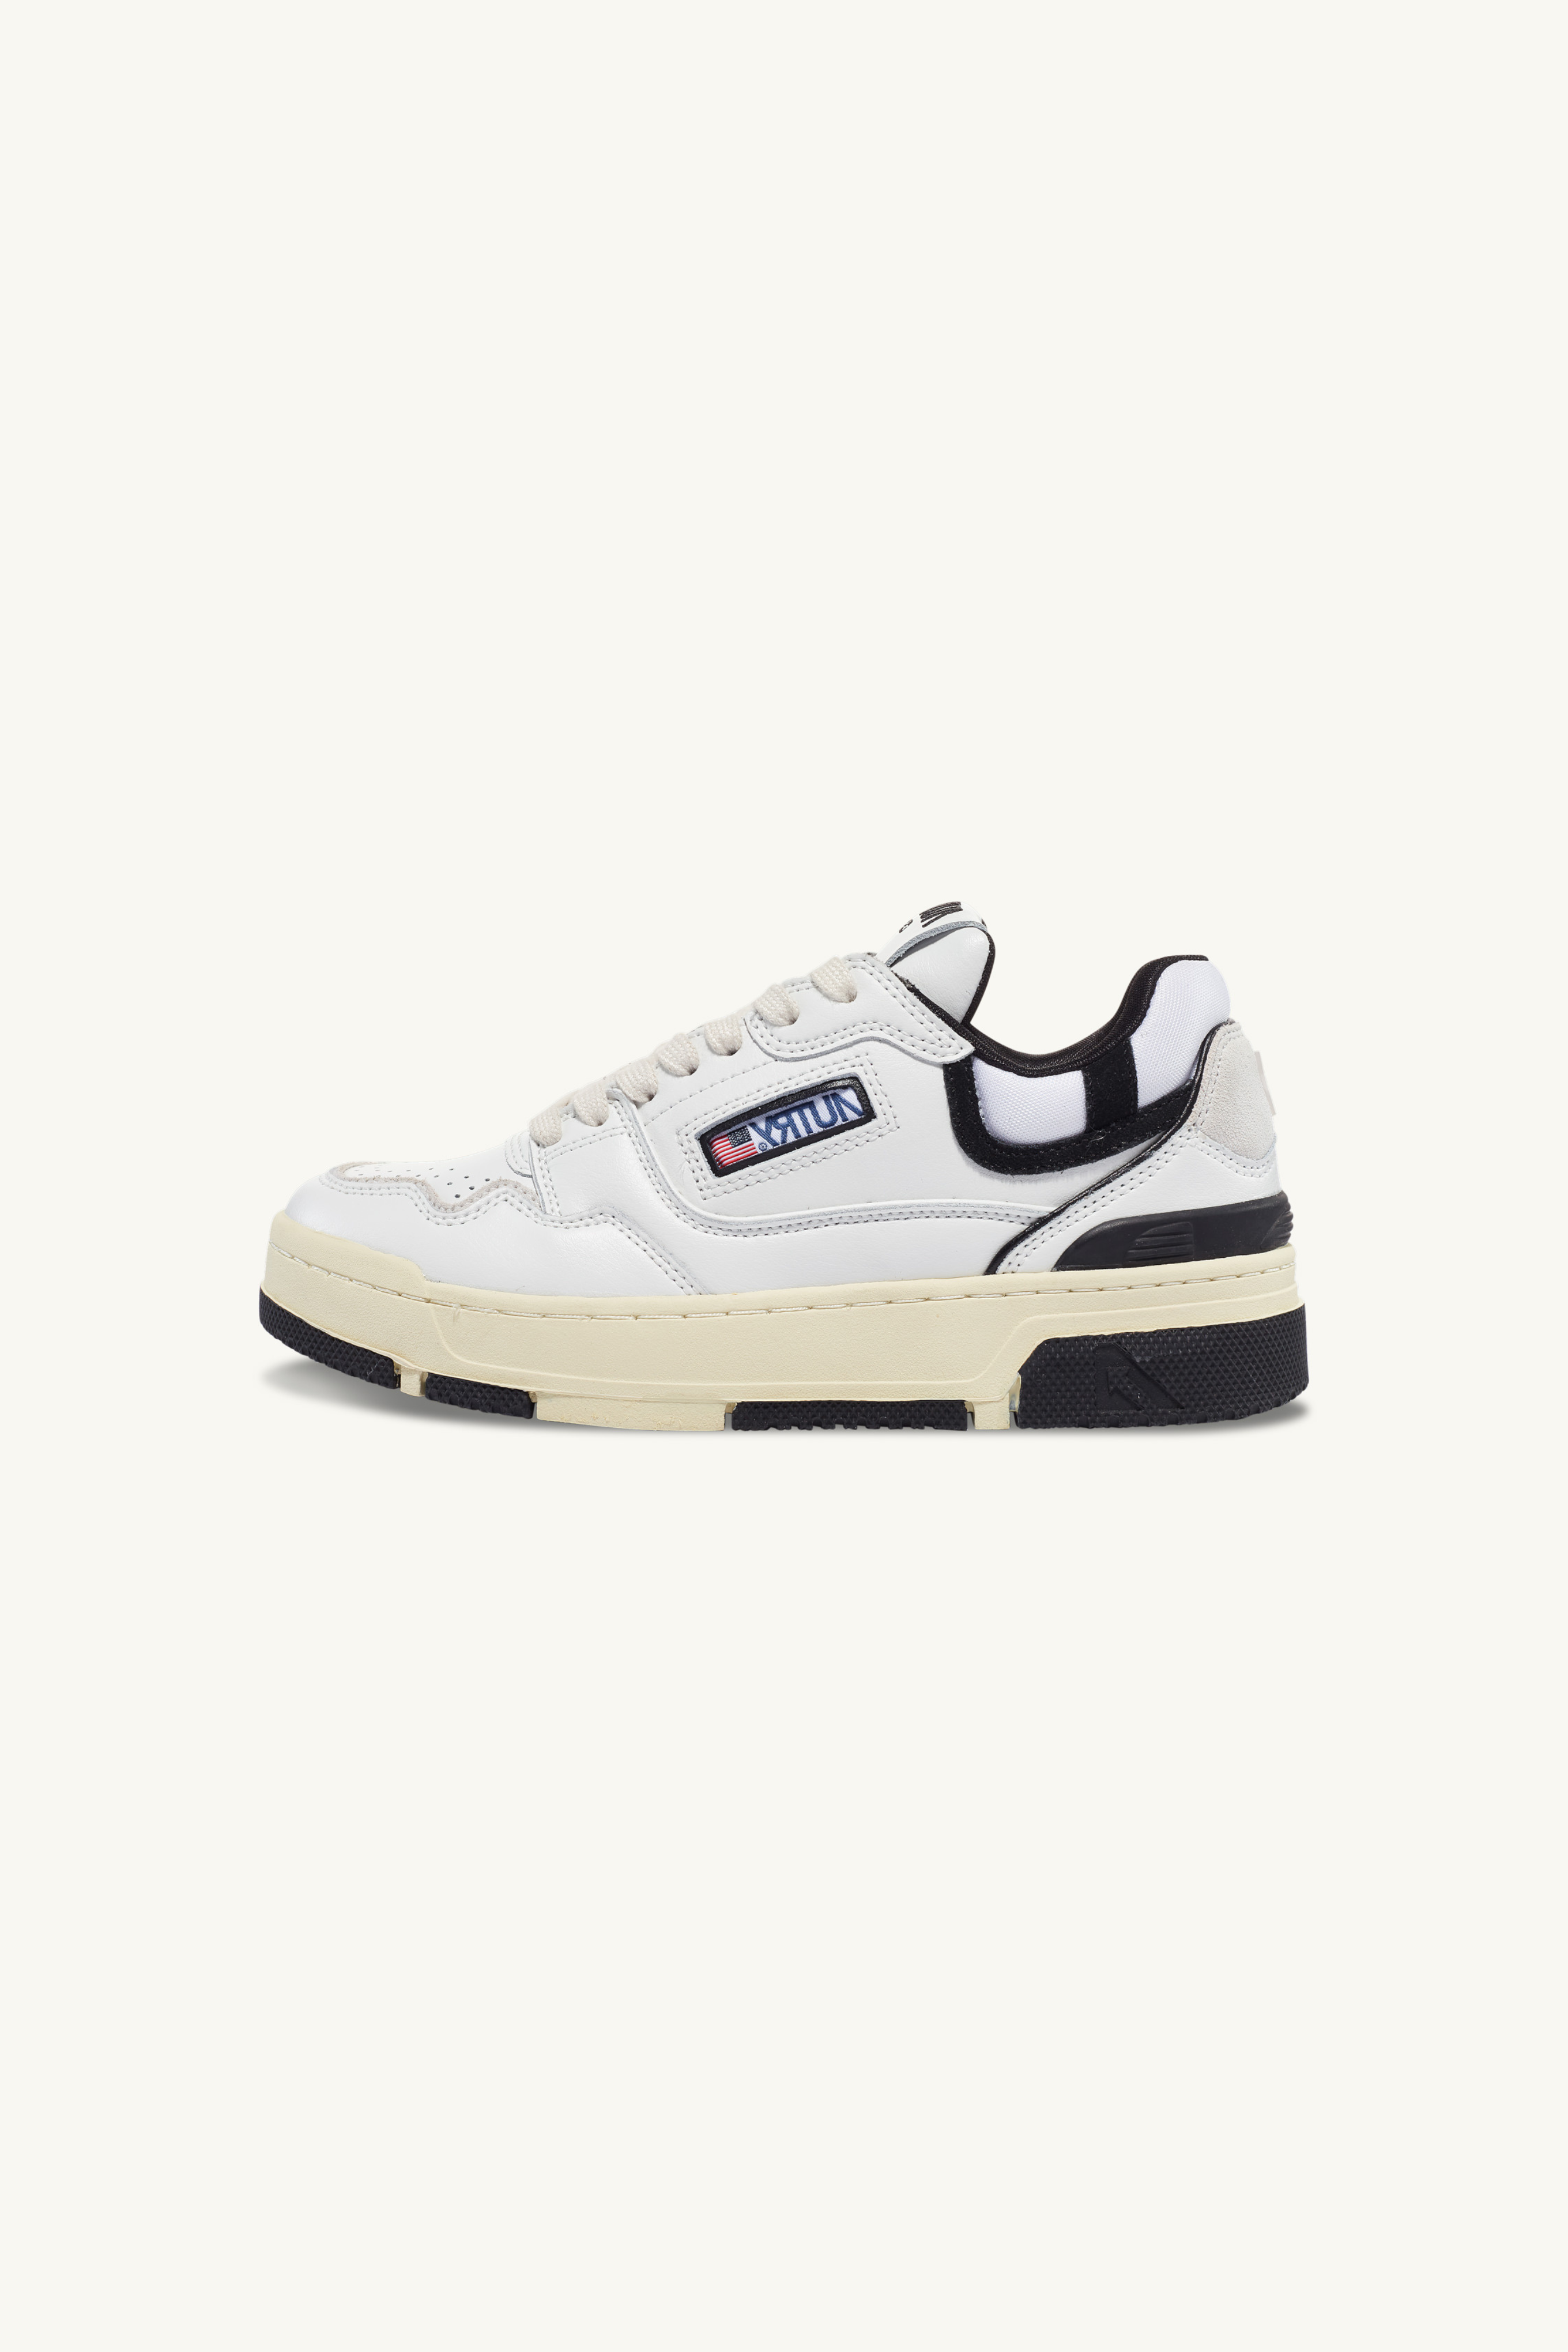 ROLW-MM04 - CLC SNEAKERS IN WHITE LEATHER AND BLACK